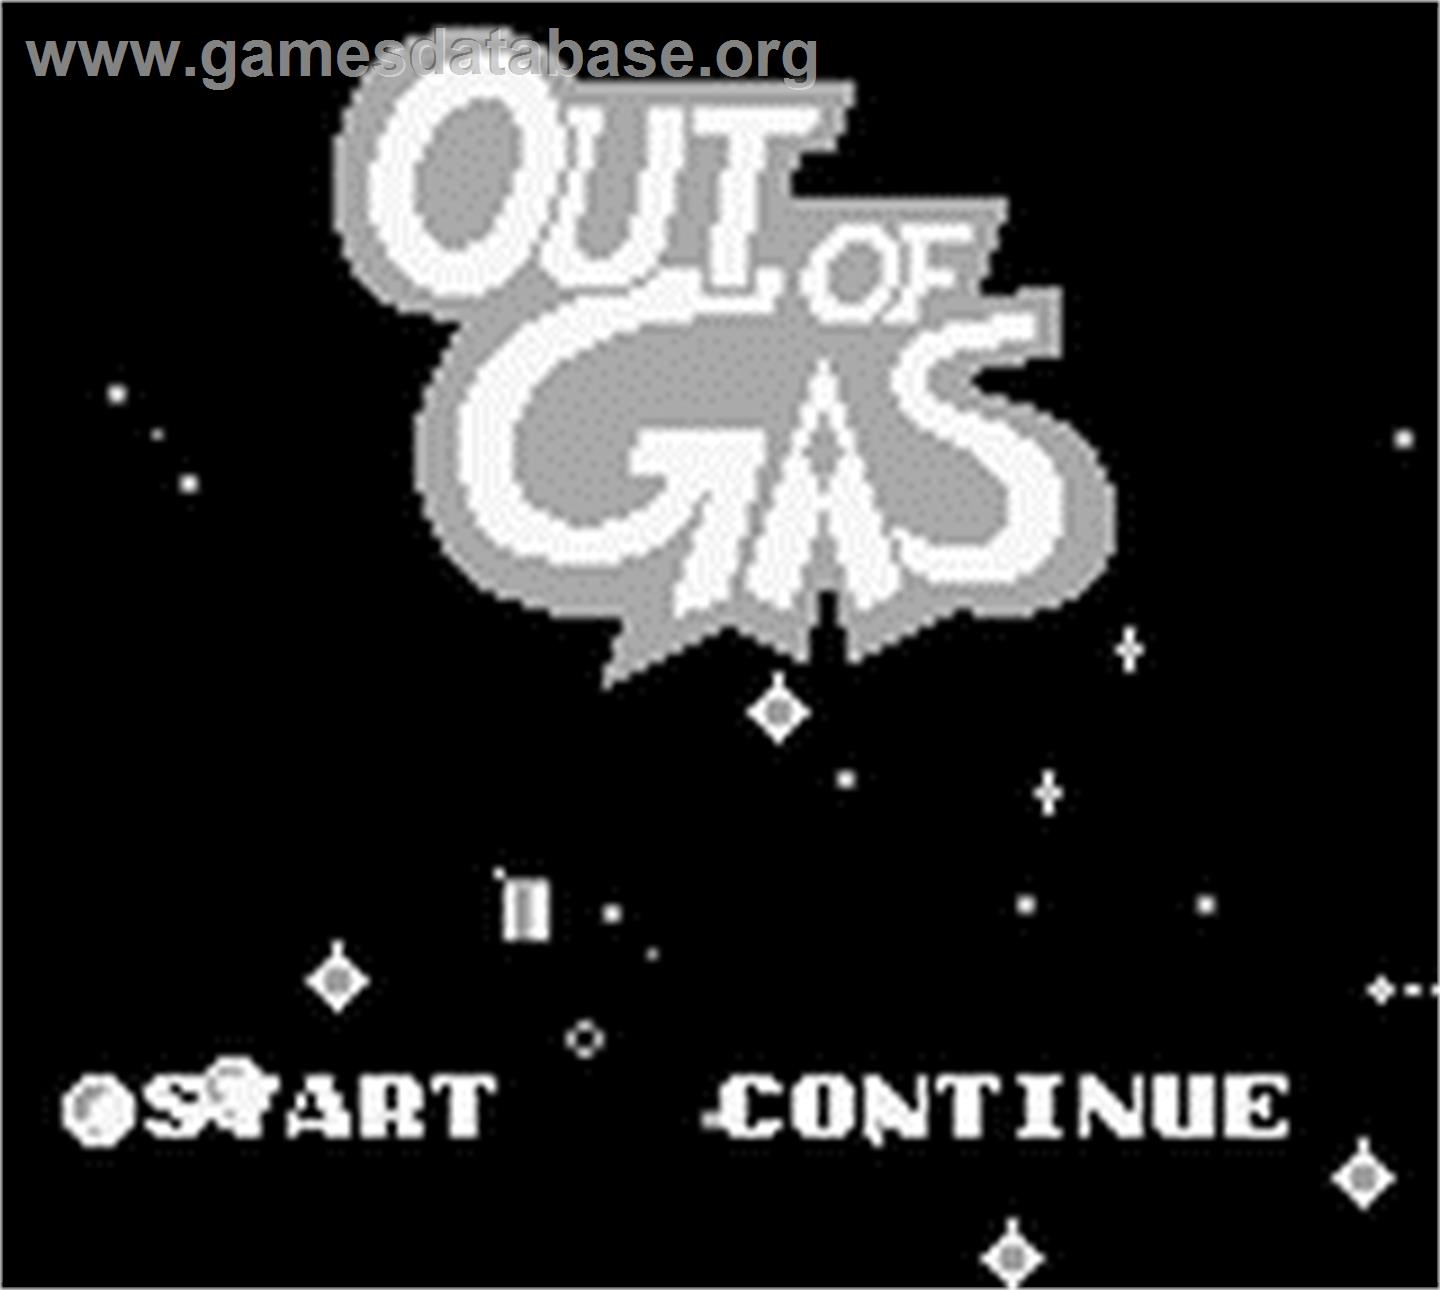 Out of Gas - Nintendo Game Boy - Artwork - Title Screen